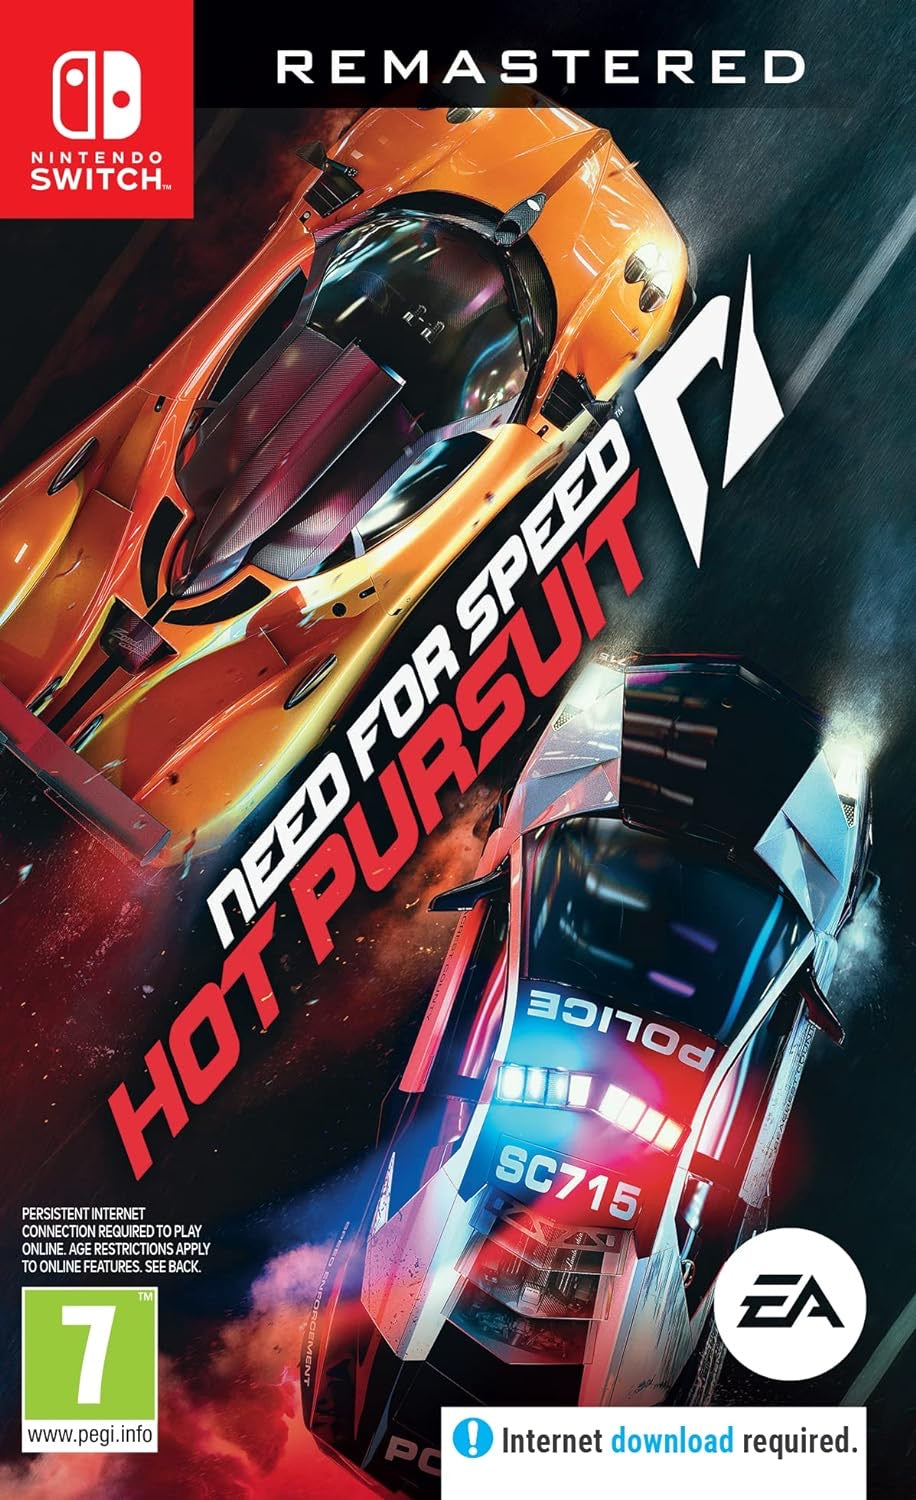 Cd Nintendo need for speed hot pursuit Remastered